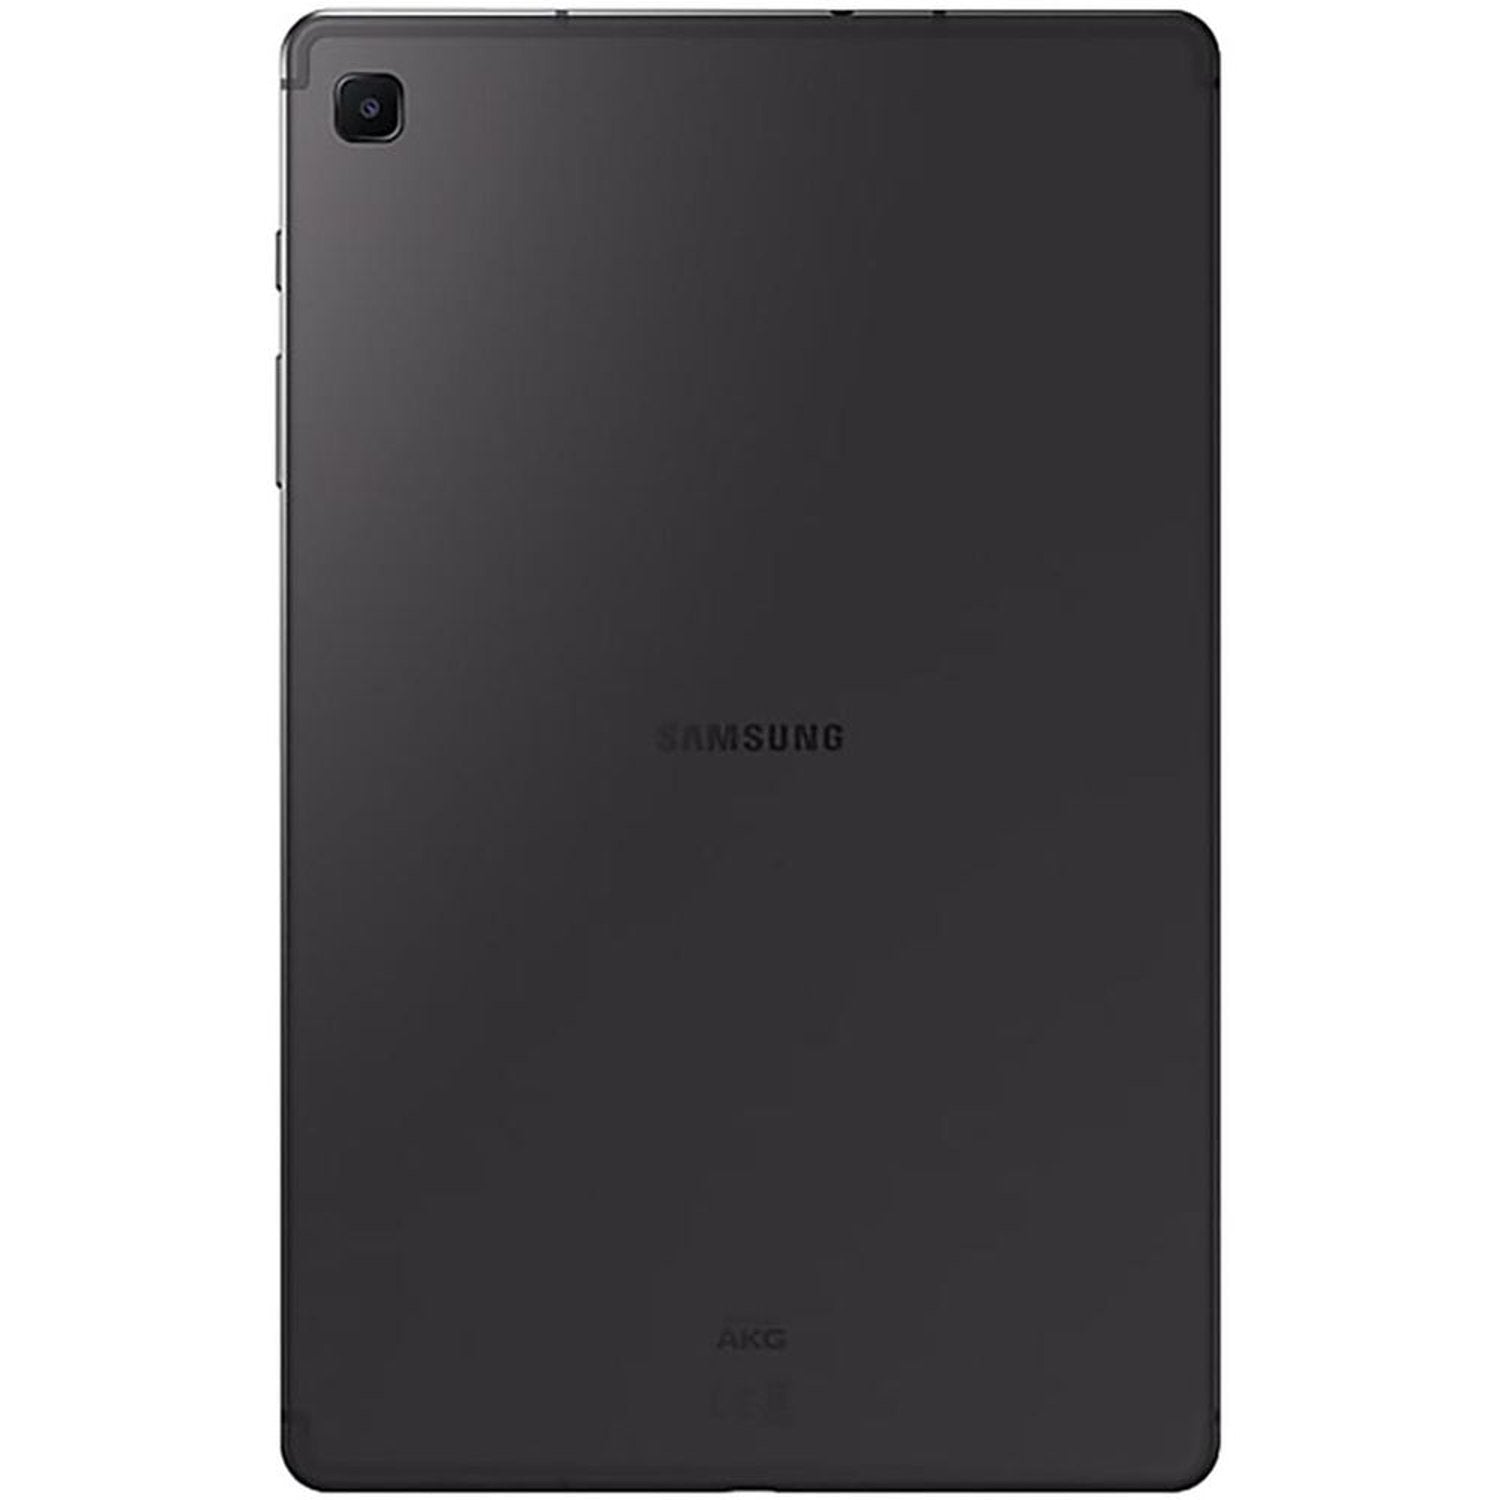 Samsung Galaxy Tab S6 Lite | Mobile & Tablet | Electronic | Beast Tablet in Bahrain | Halabh.com